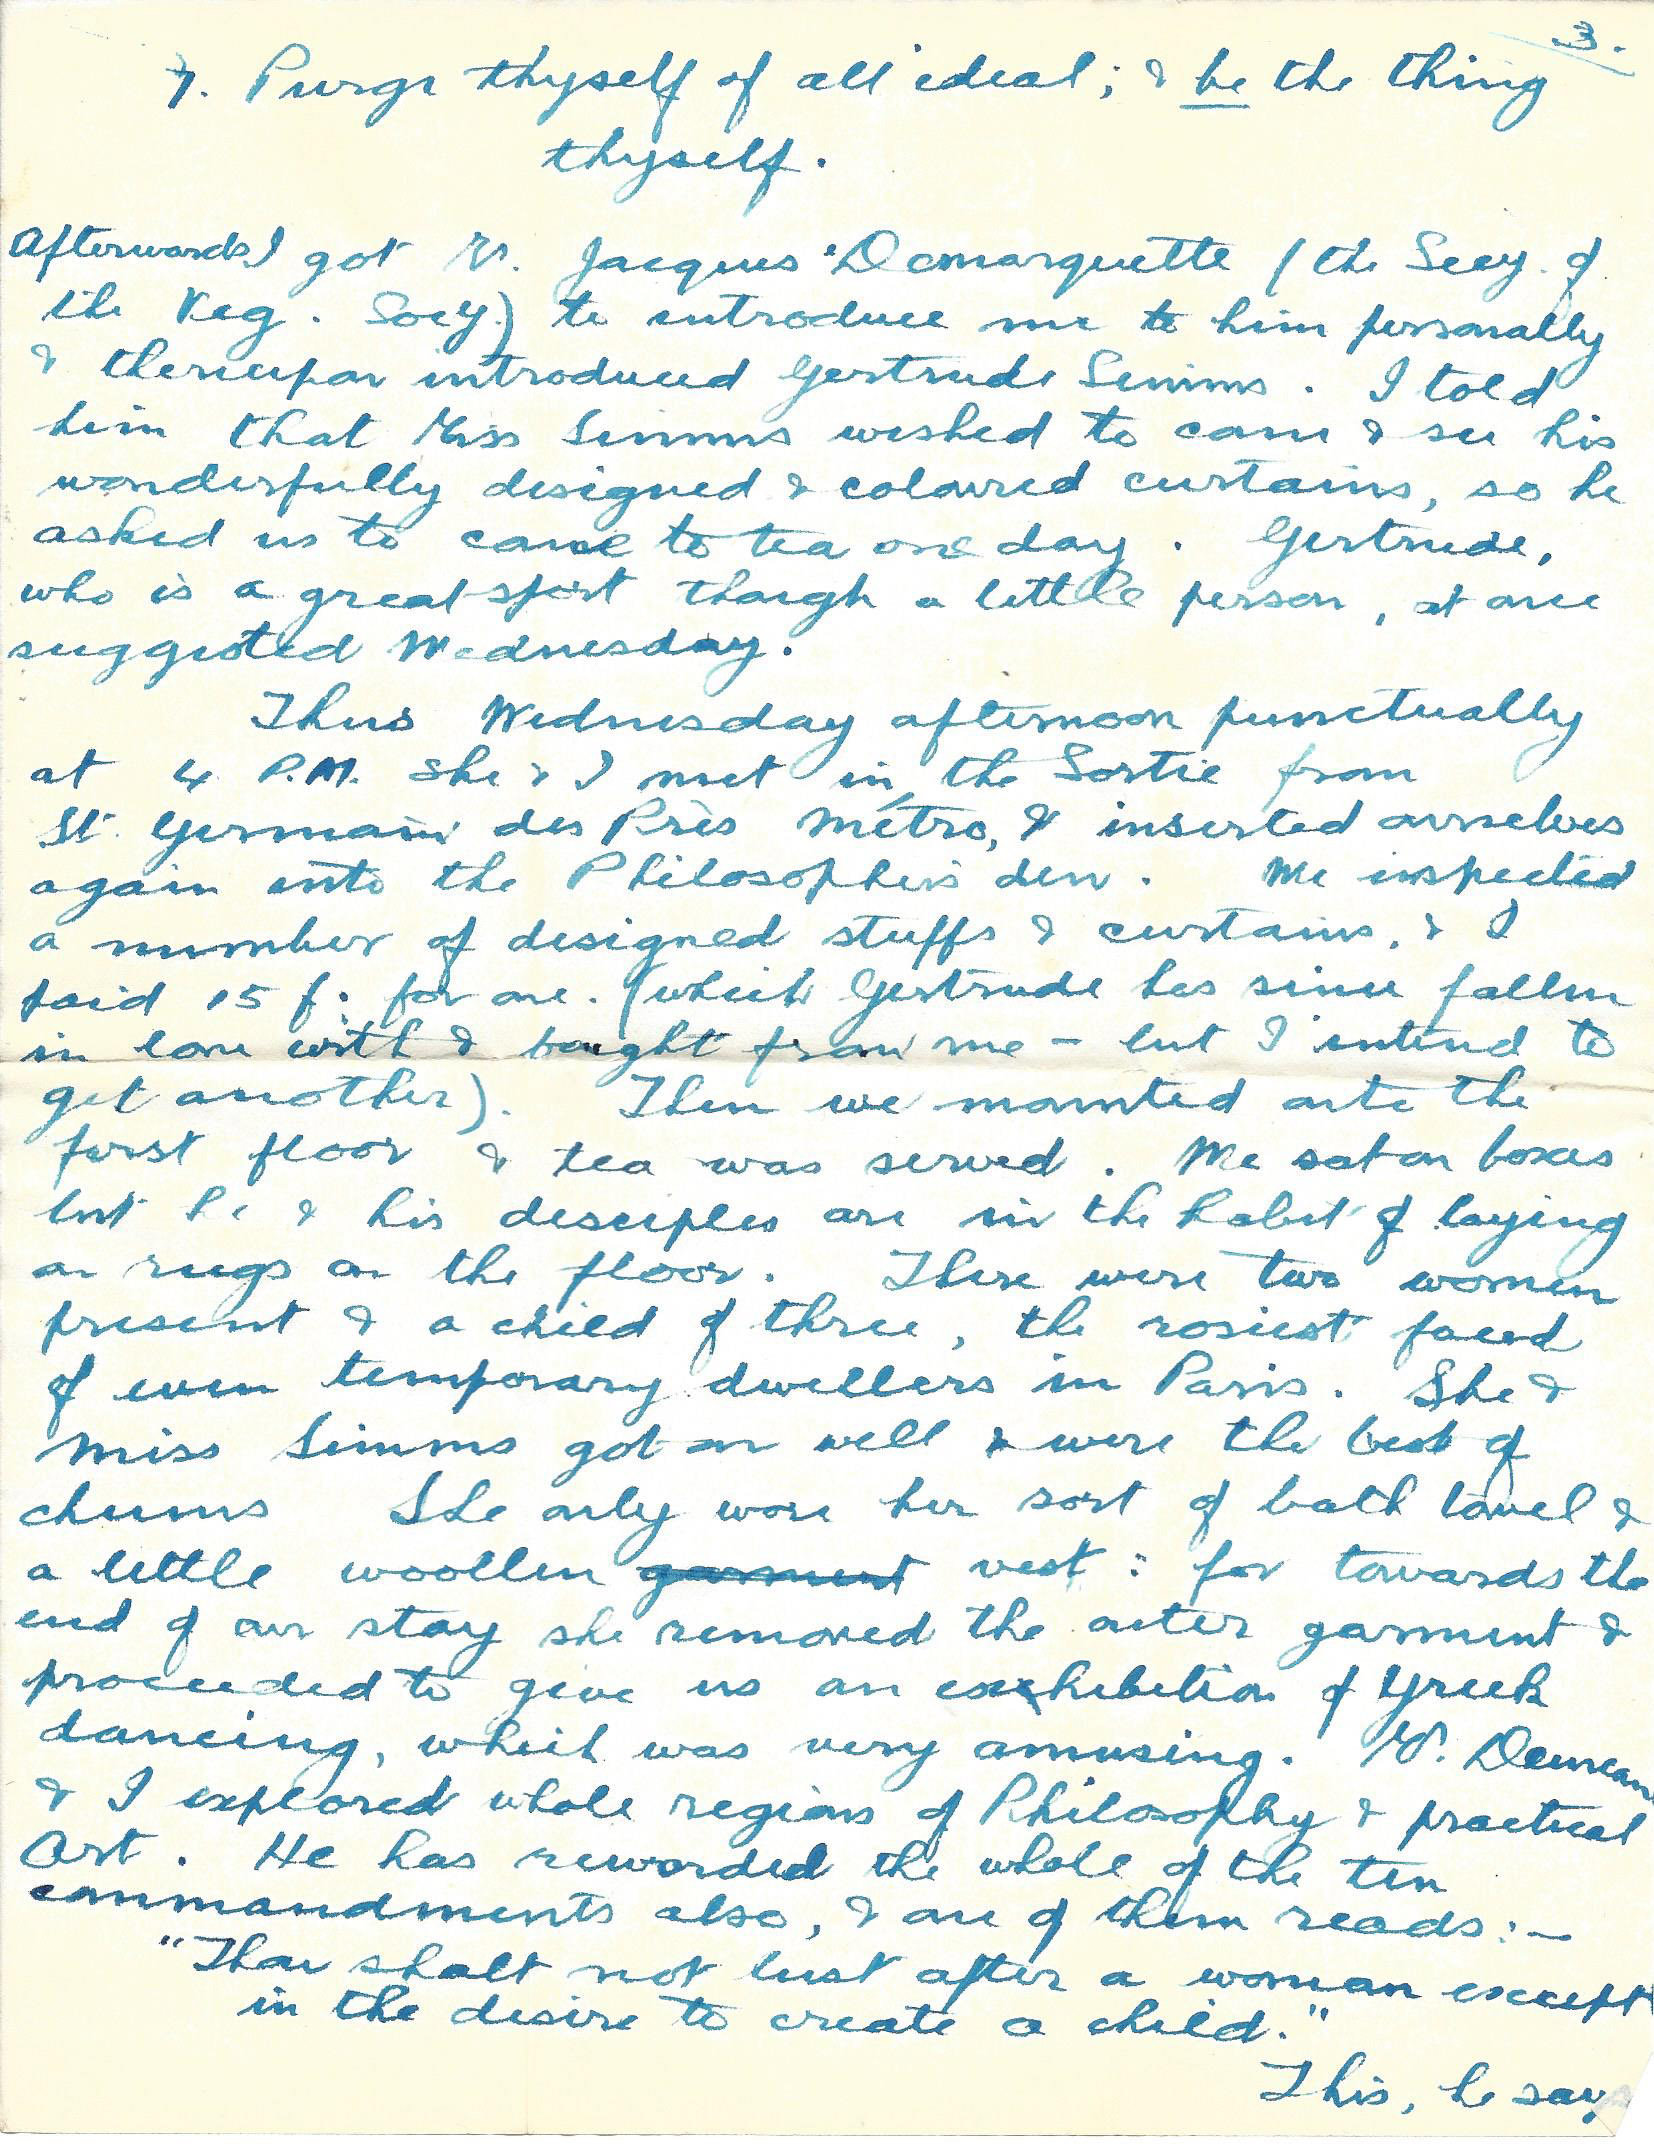 1919-12-13 Page 3 letter by Donald Bearman